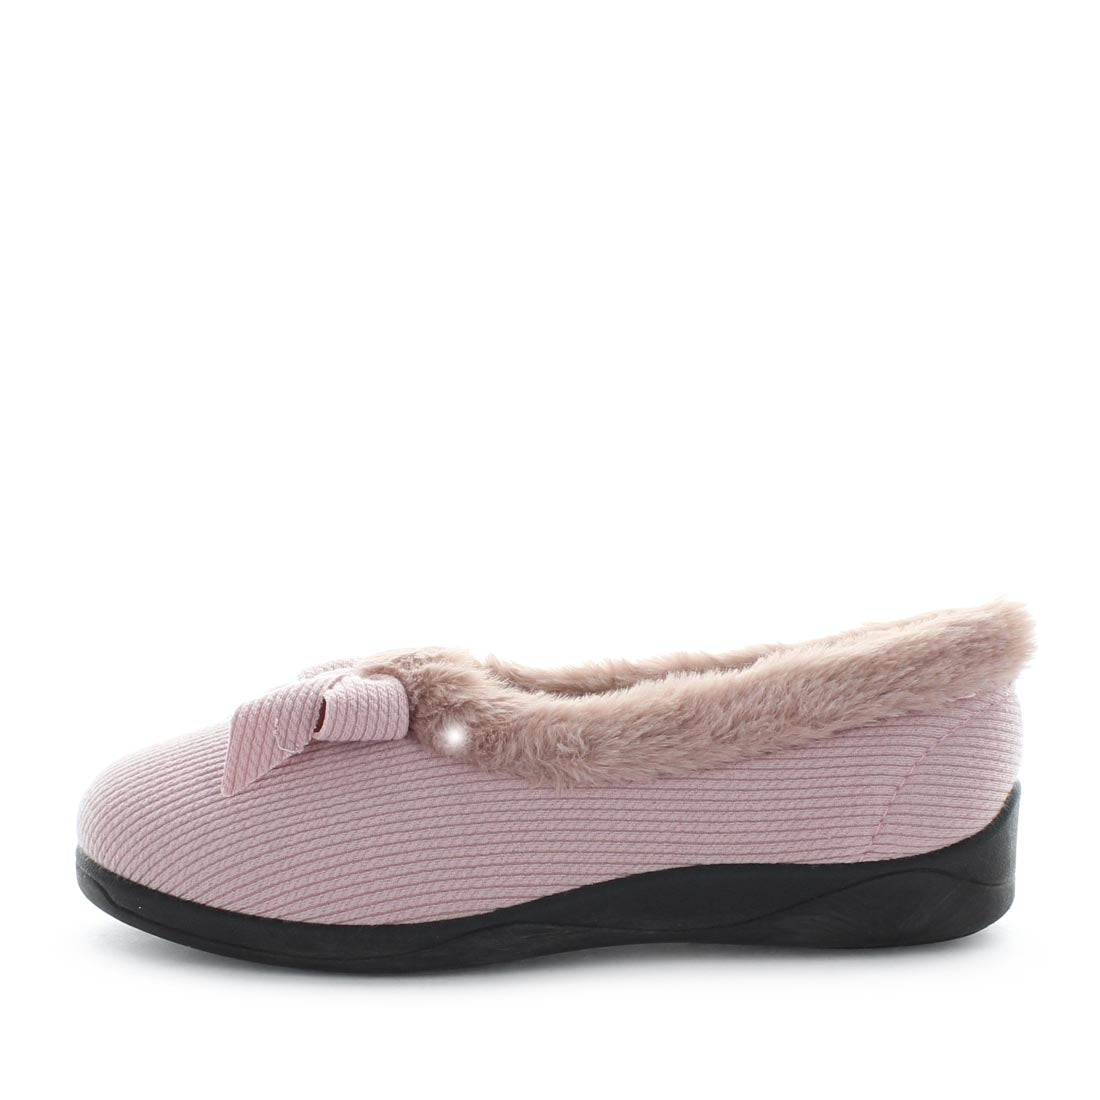 Electra by panda slippers, women's slippers, women's comfort slippers, Ballet slippers with a cute bow like feature, warm lining and sock with a flexible and durable outsole. women's comfort warm slippers, ladies slippers